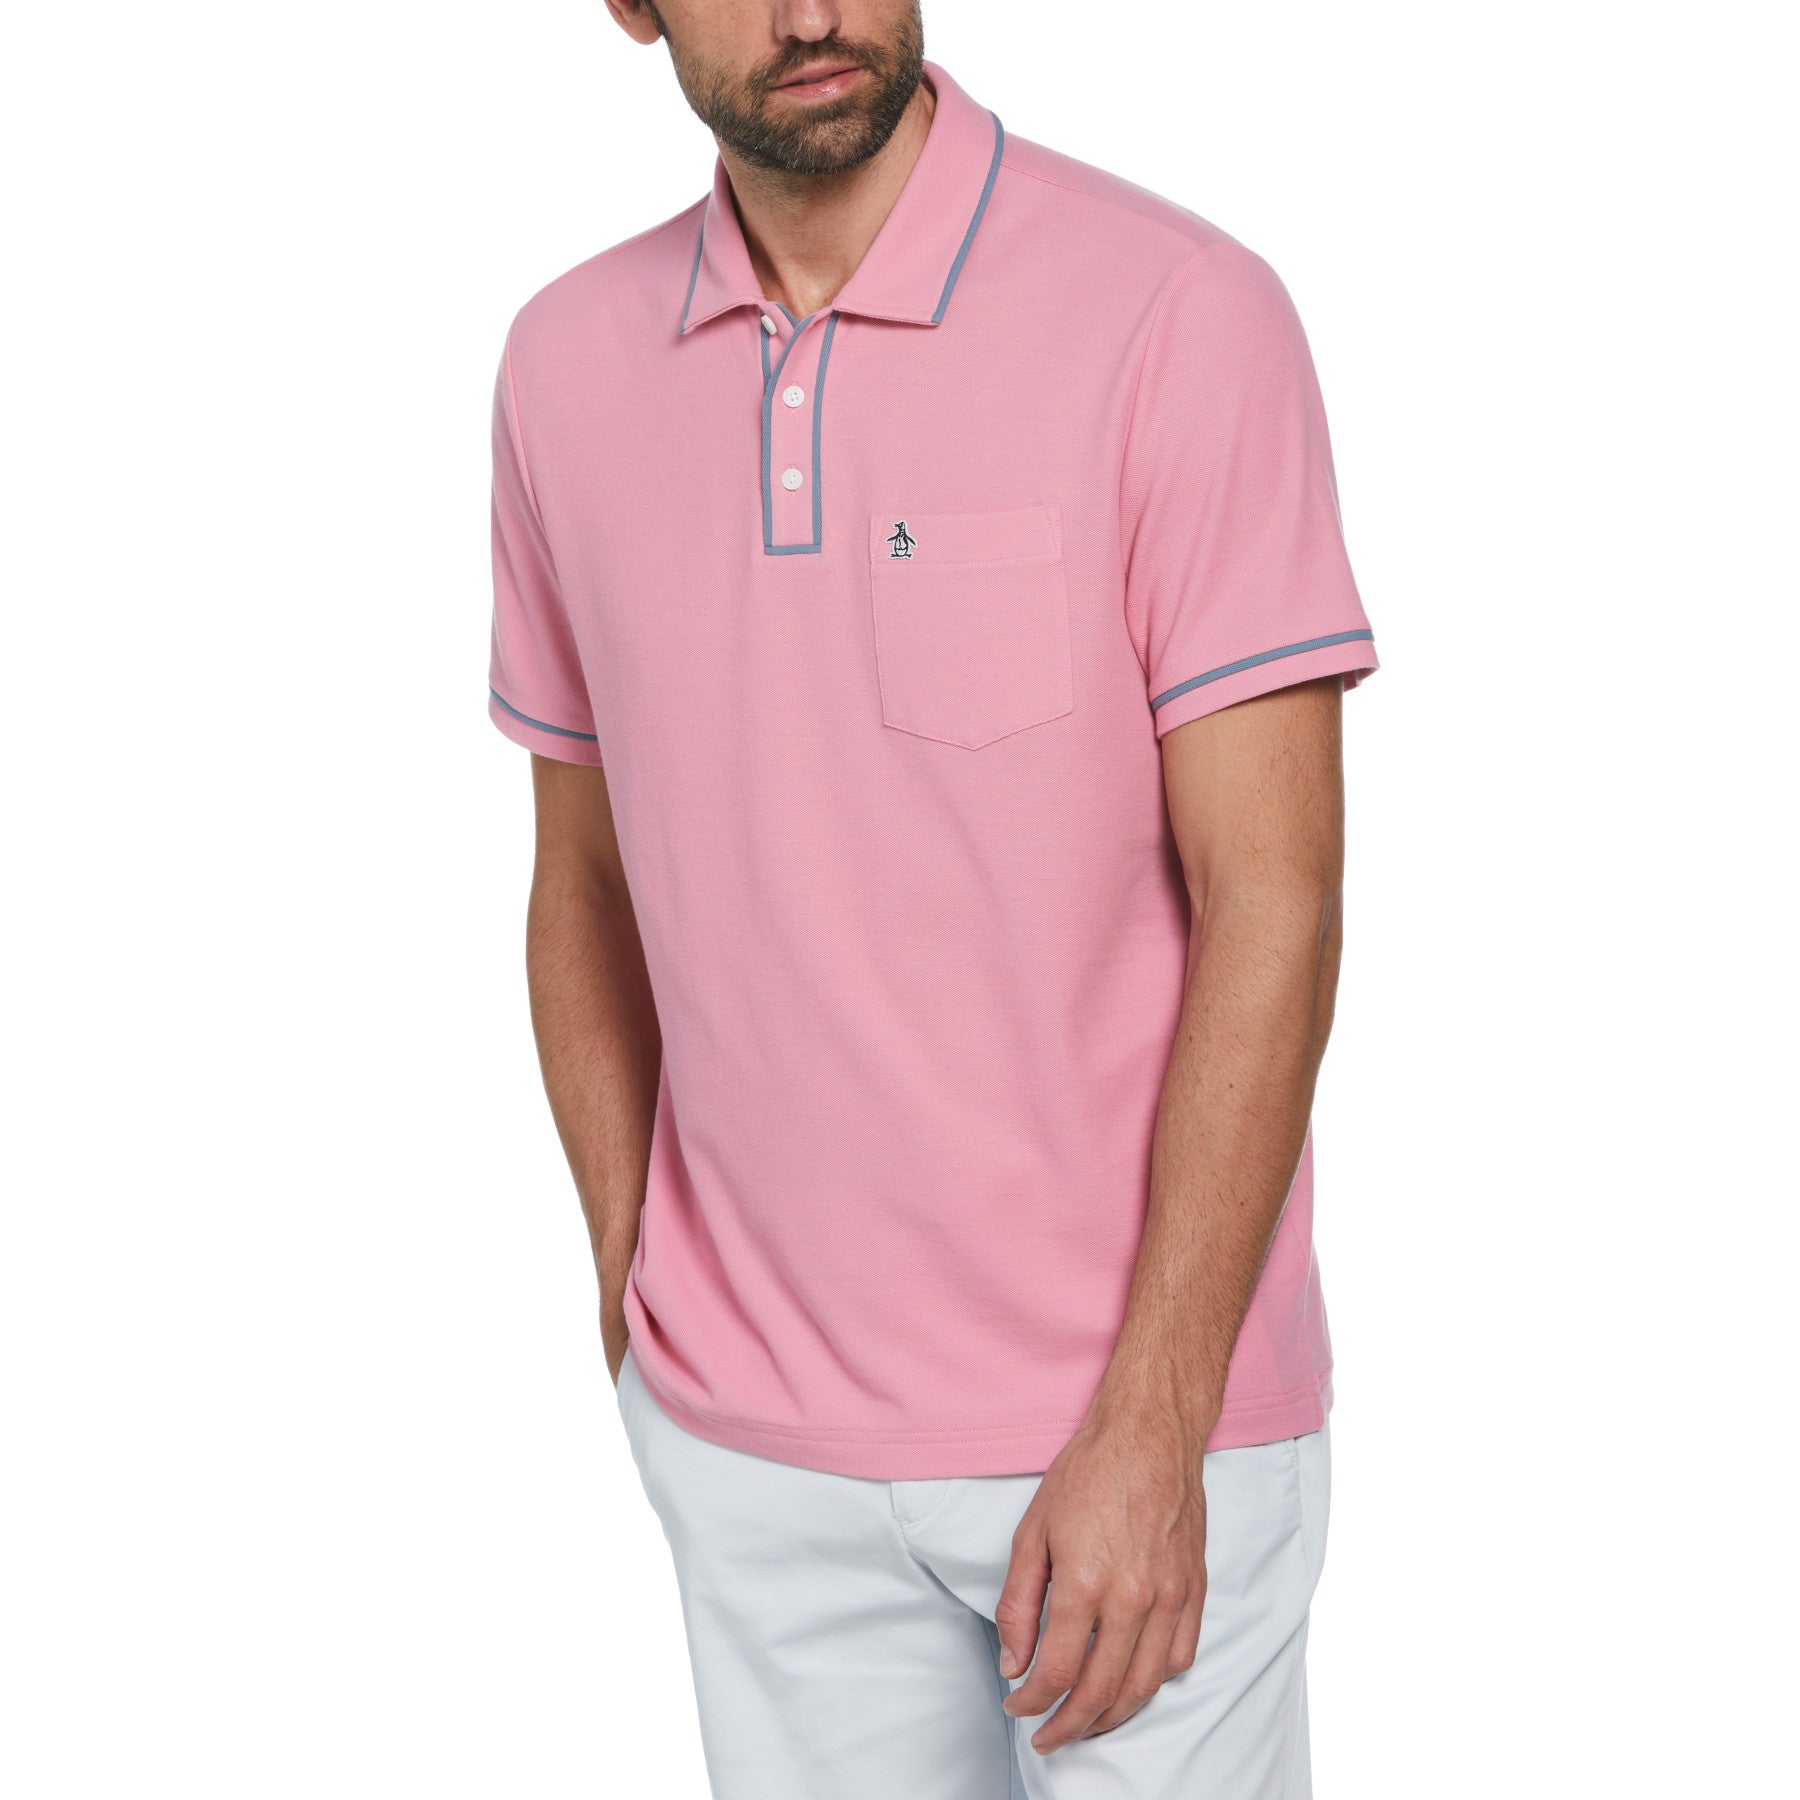 View Organic Cotton The Earl Pique Short Sleeve Polo Shirt In Wild Rose information